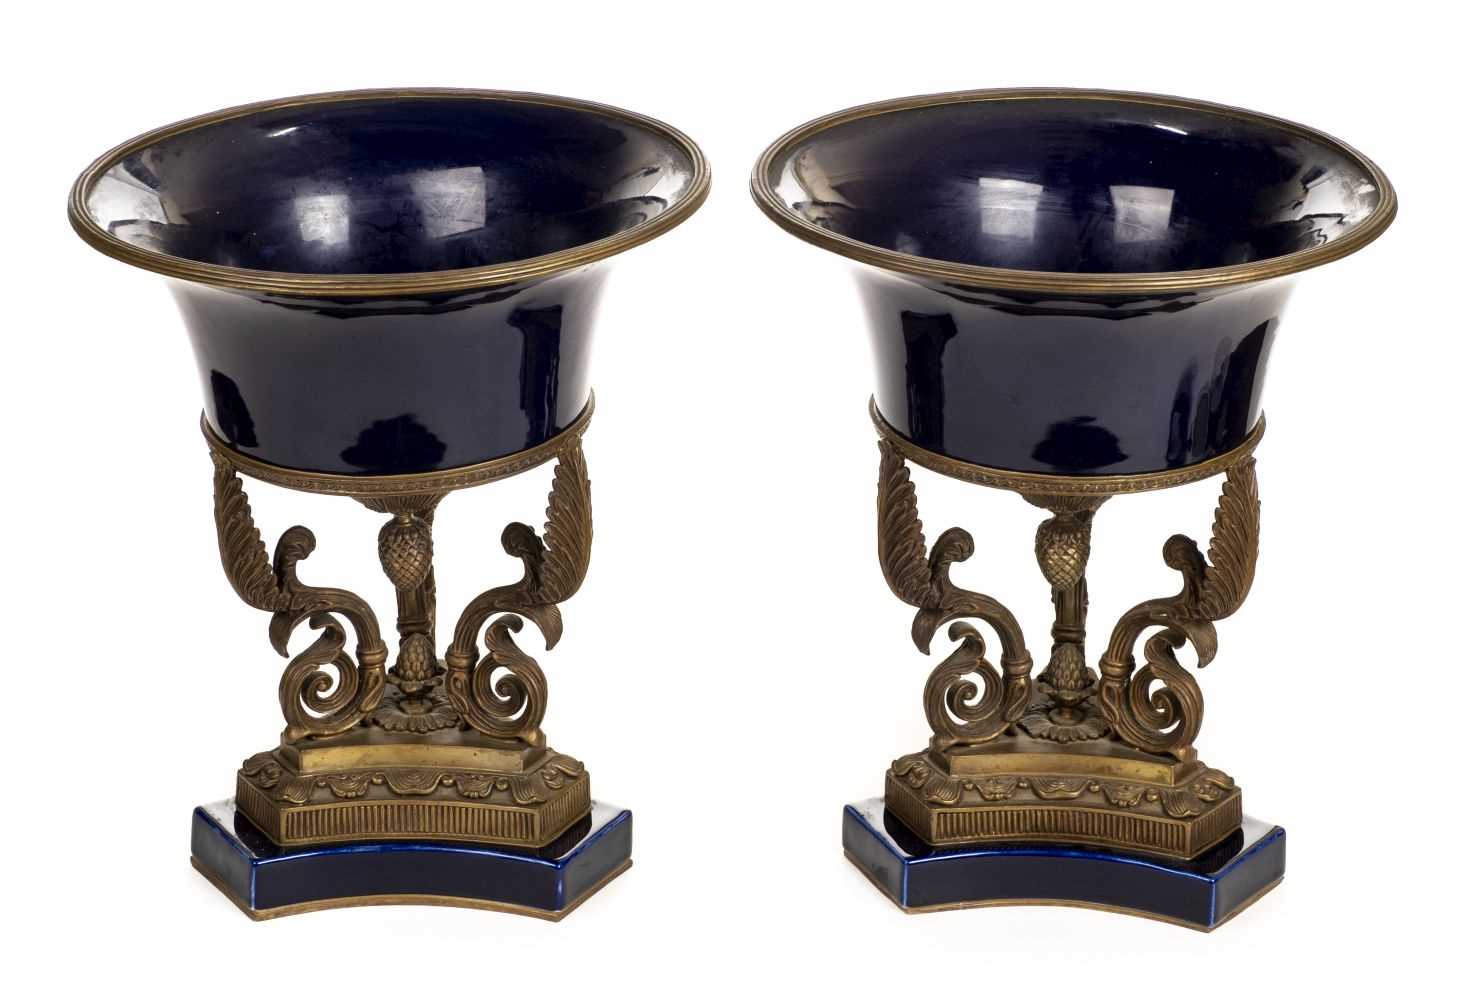 Lot 27 - Urns. A pair of 18th century style urns